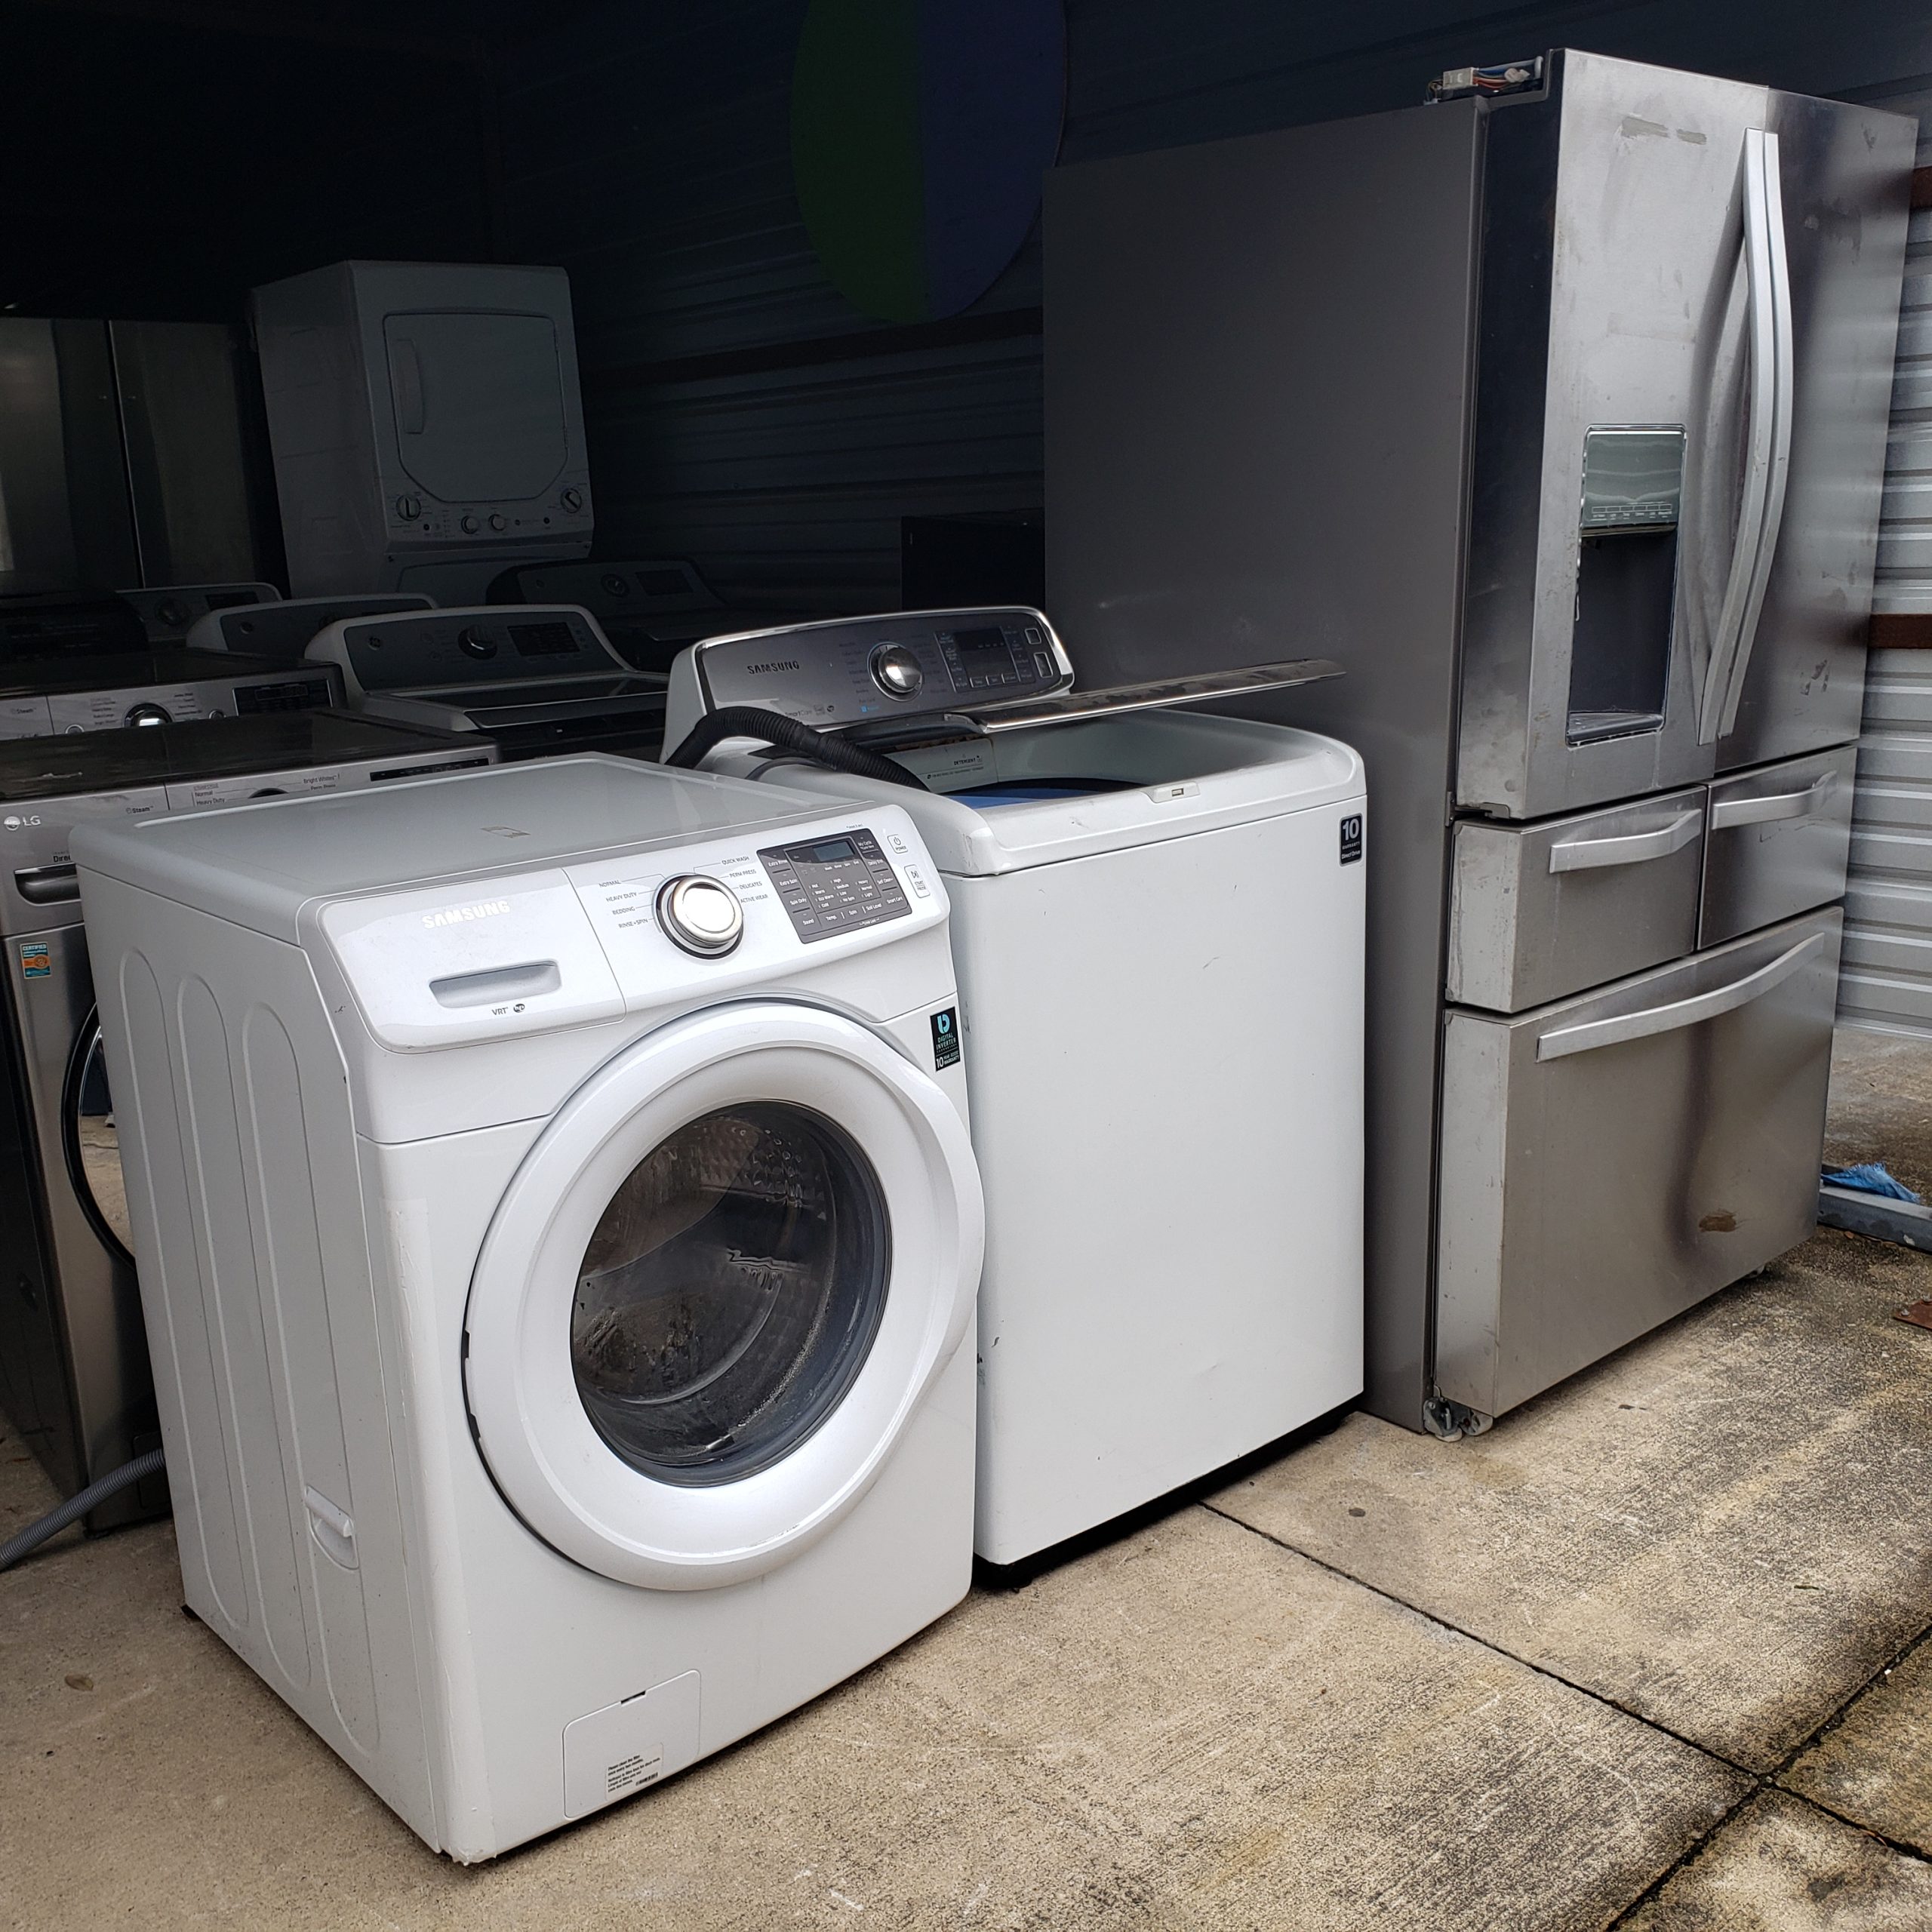 example of Salvage or Broken Appliances for sale by the truckload.